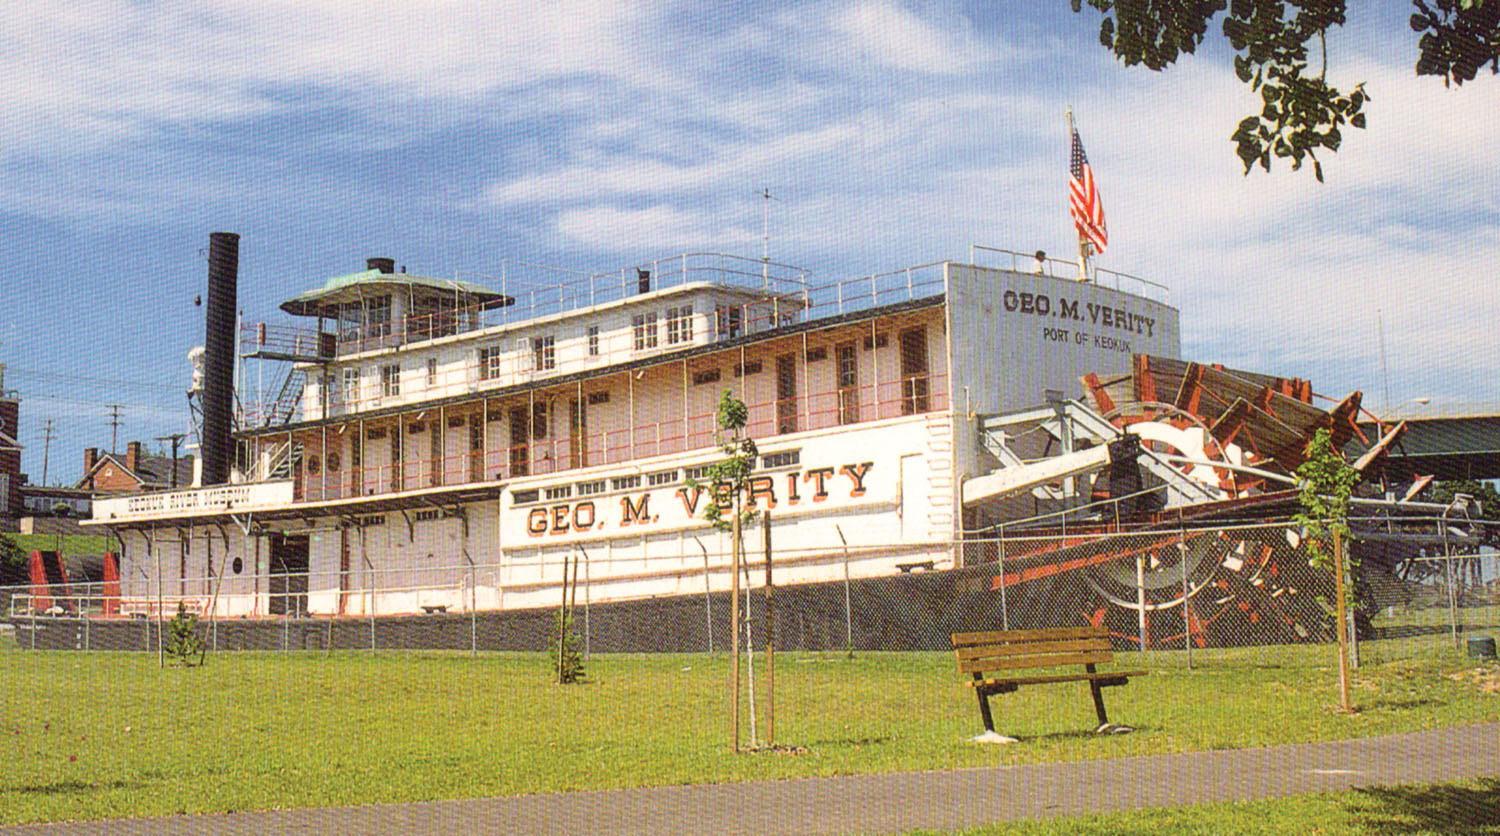 The retired steam towboat George M. Verity has been a museum at Keokuk since 1961. (Keith Norrington collection)